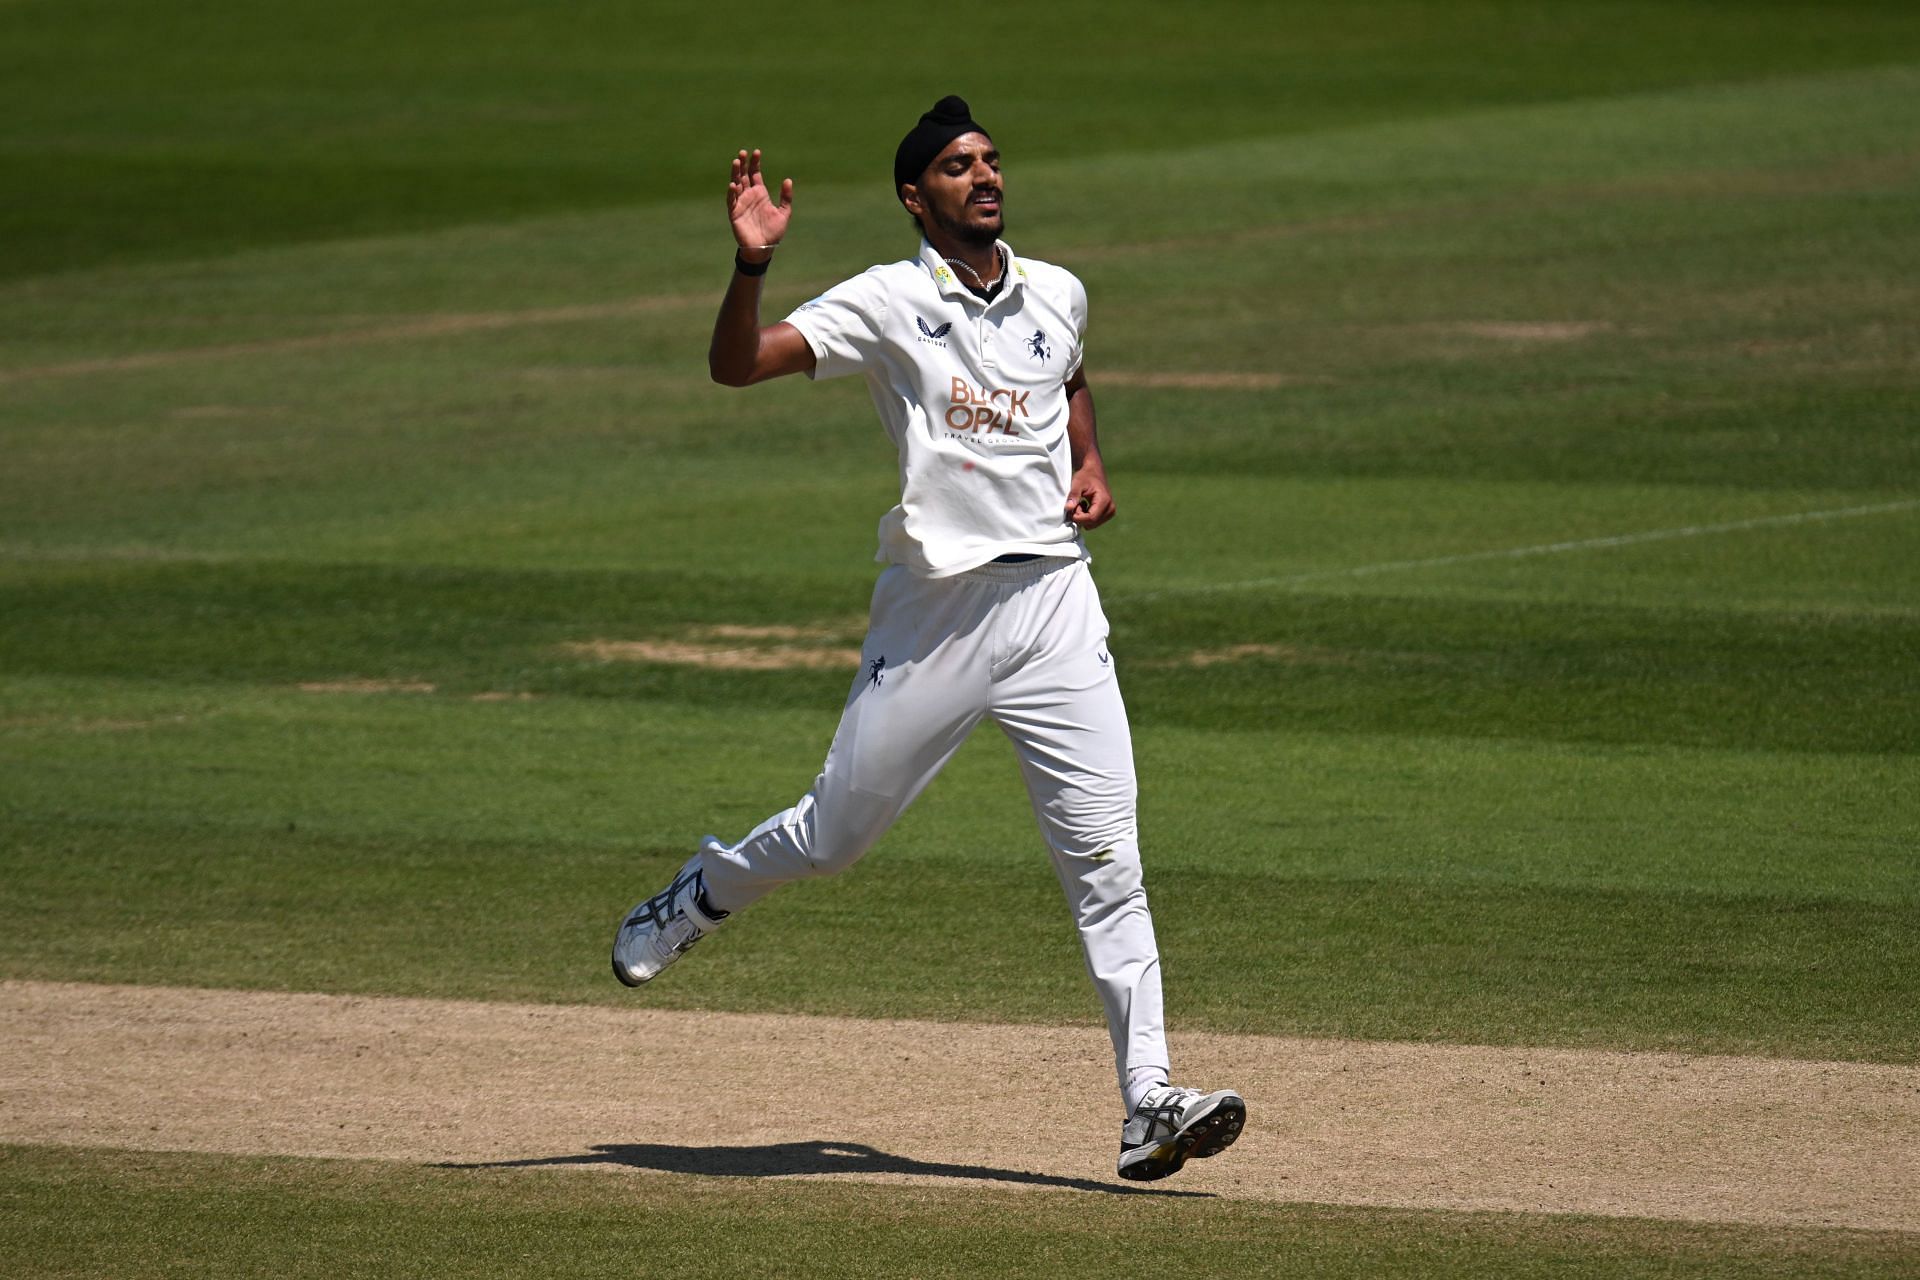 Arshdeep Singh is playing county cricket for Kent.